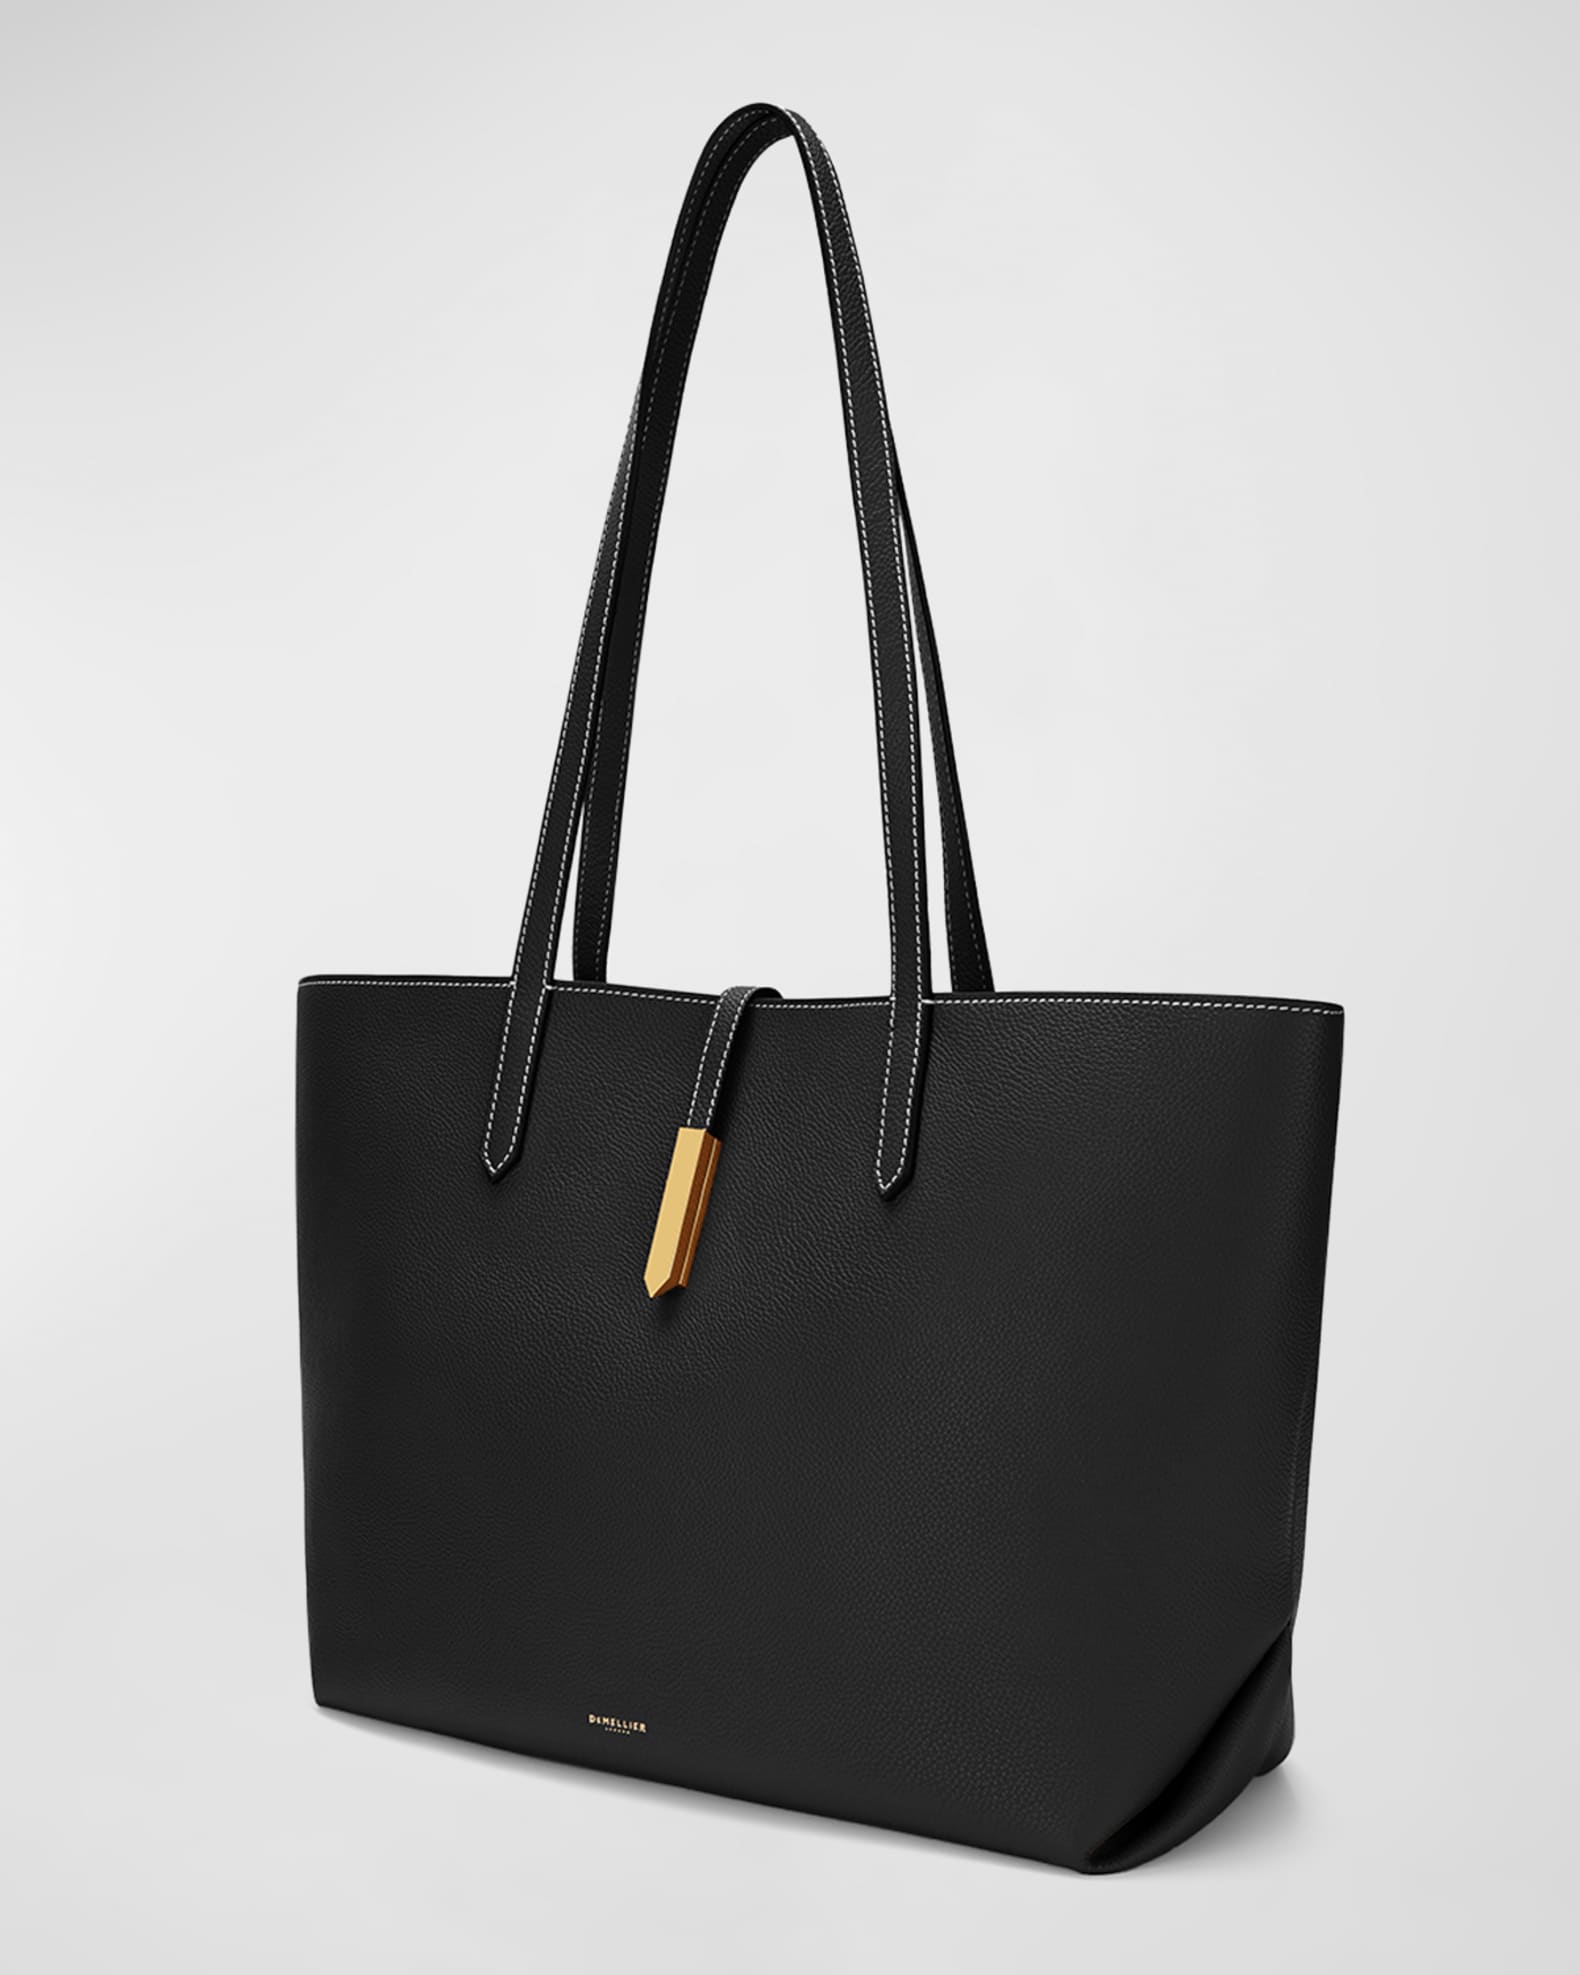 DeMellier Tokyo Leather Tote Bag | Neiman Marcus